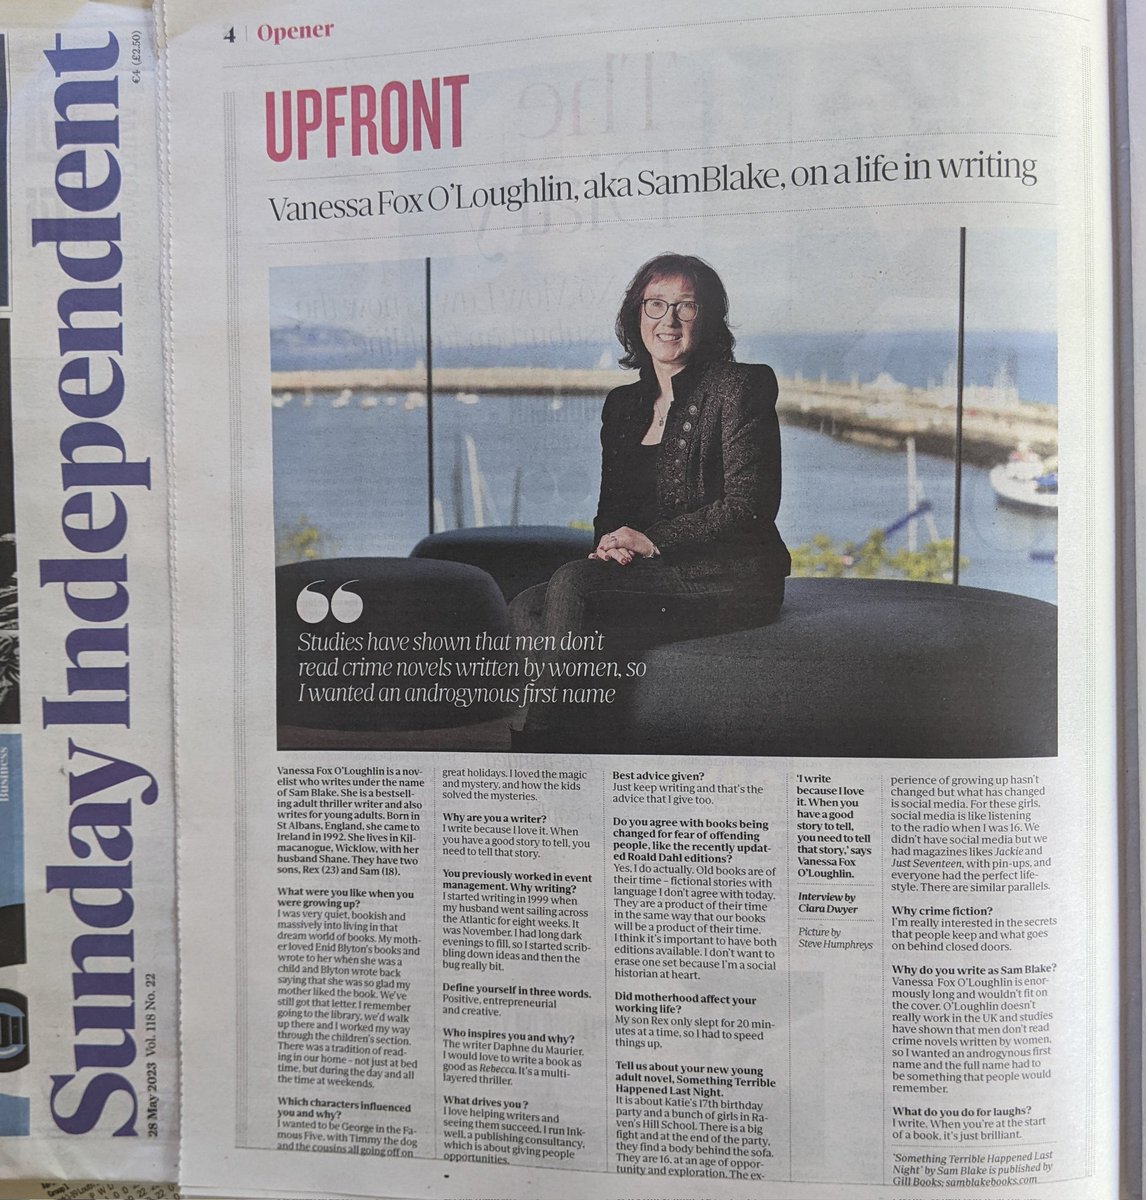 Here's the print version of Sunday Indo article & just look at that view - for anyone not local this shot was taken in the library in Dun Laoghaire @dlrLexIcon, isn't it magnificent? #lovelibraries

Coincidentally our venue 4 @SlaughterKarin eve on 20th June and @MurderOneFest 😊